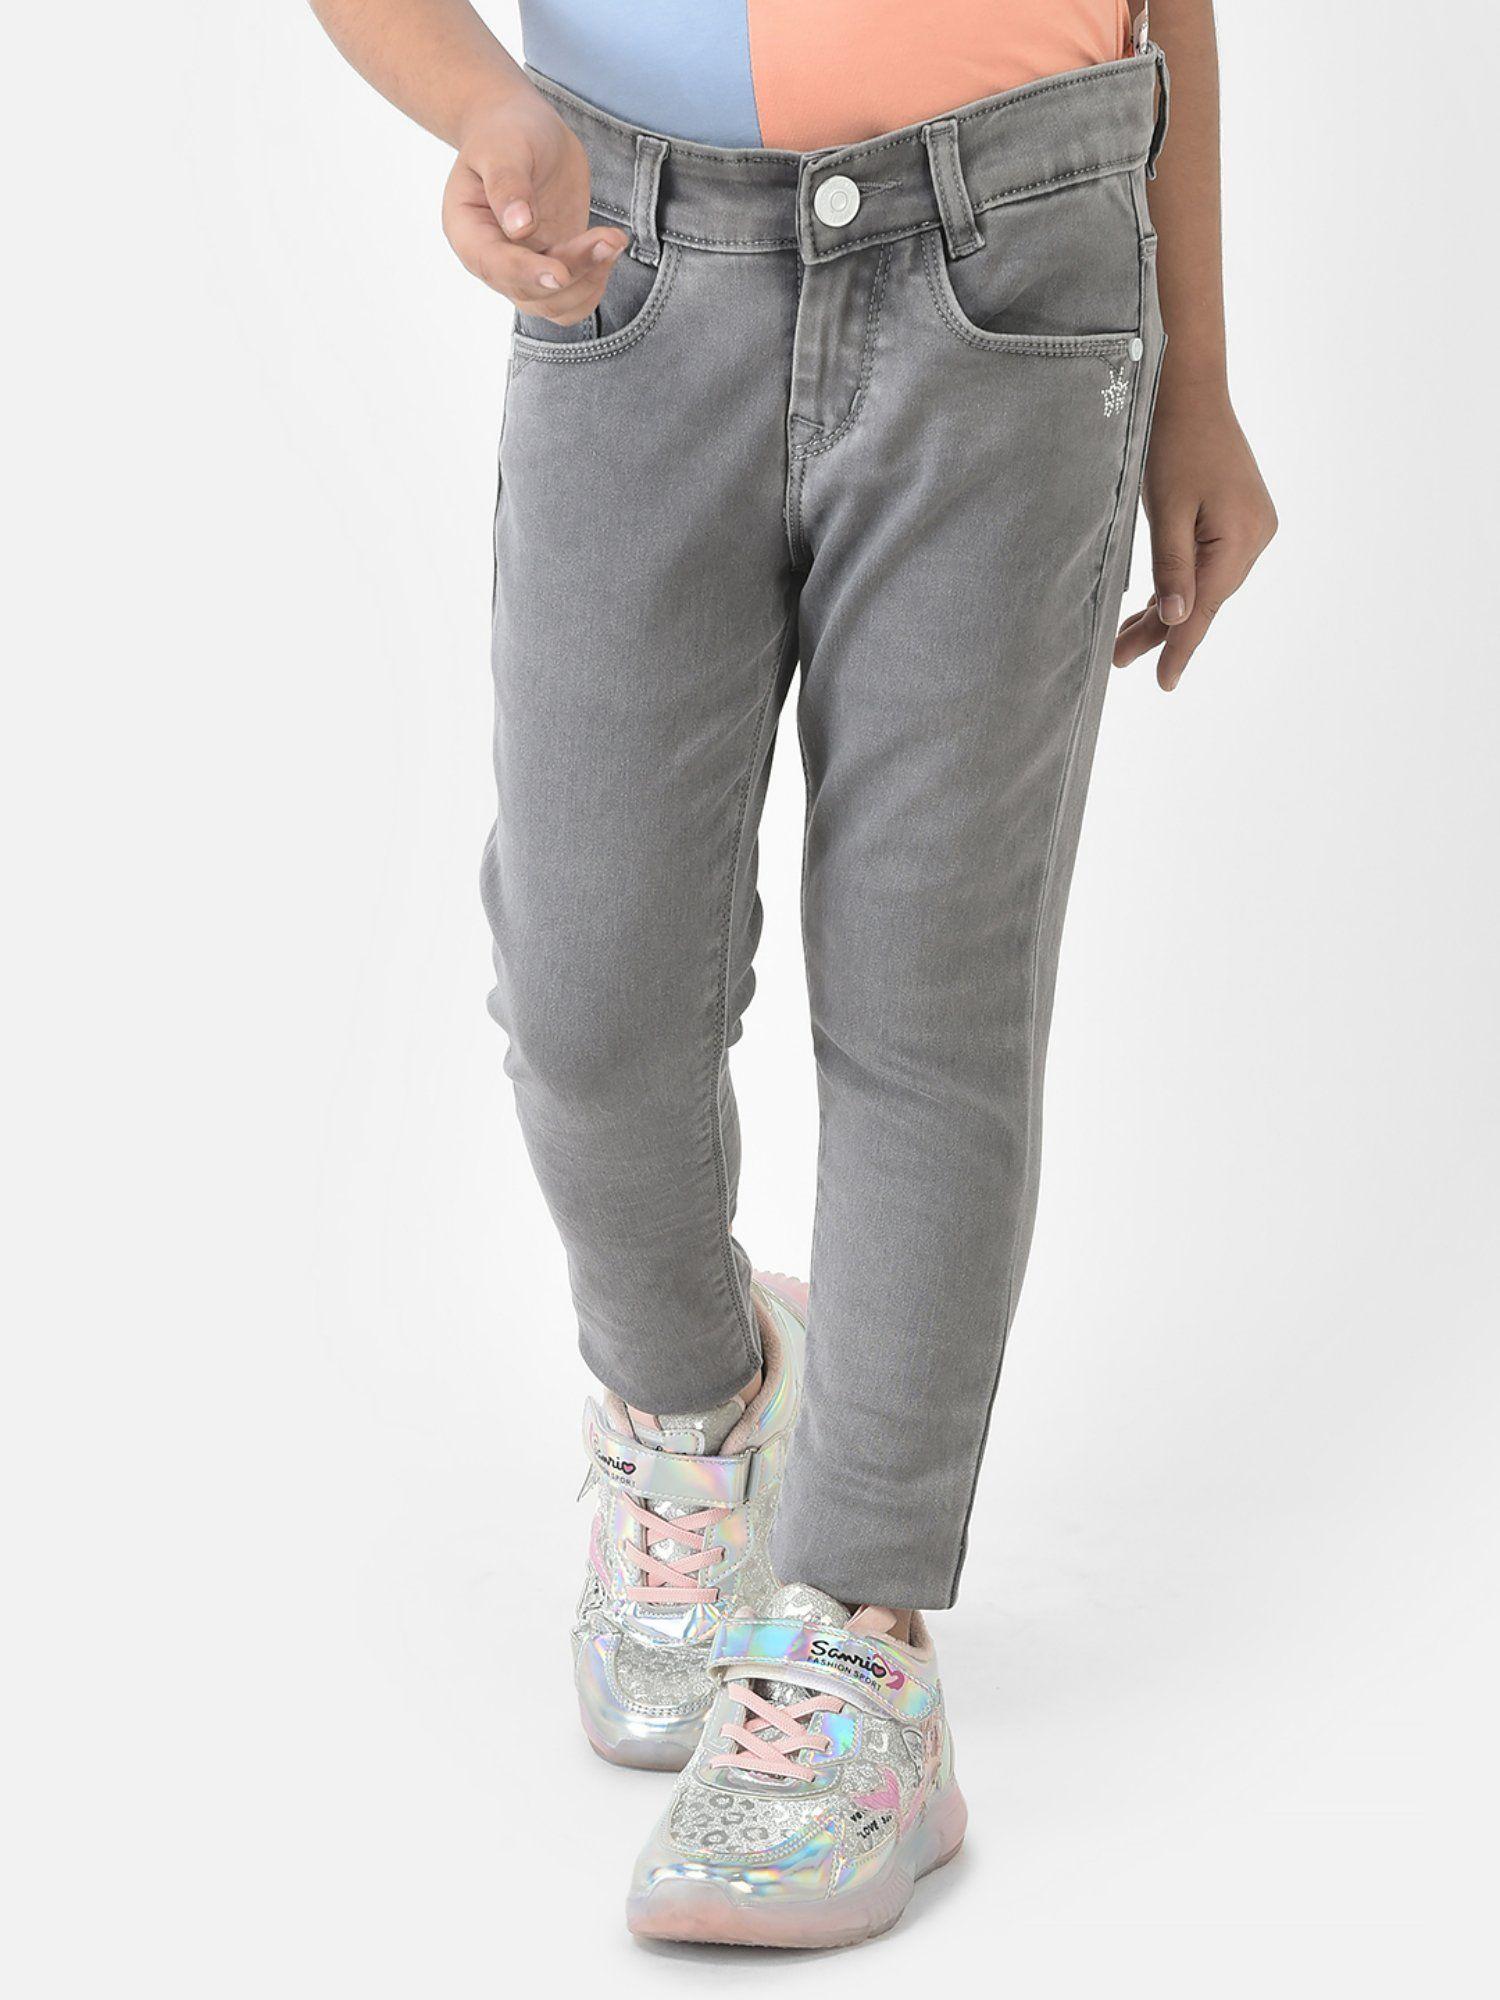 girls grey jeans with logo detailing